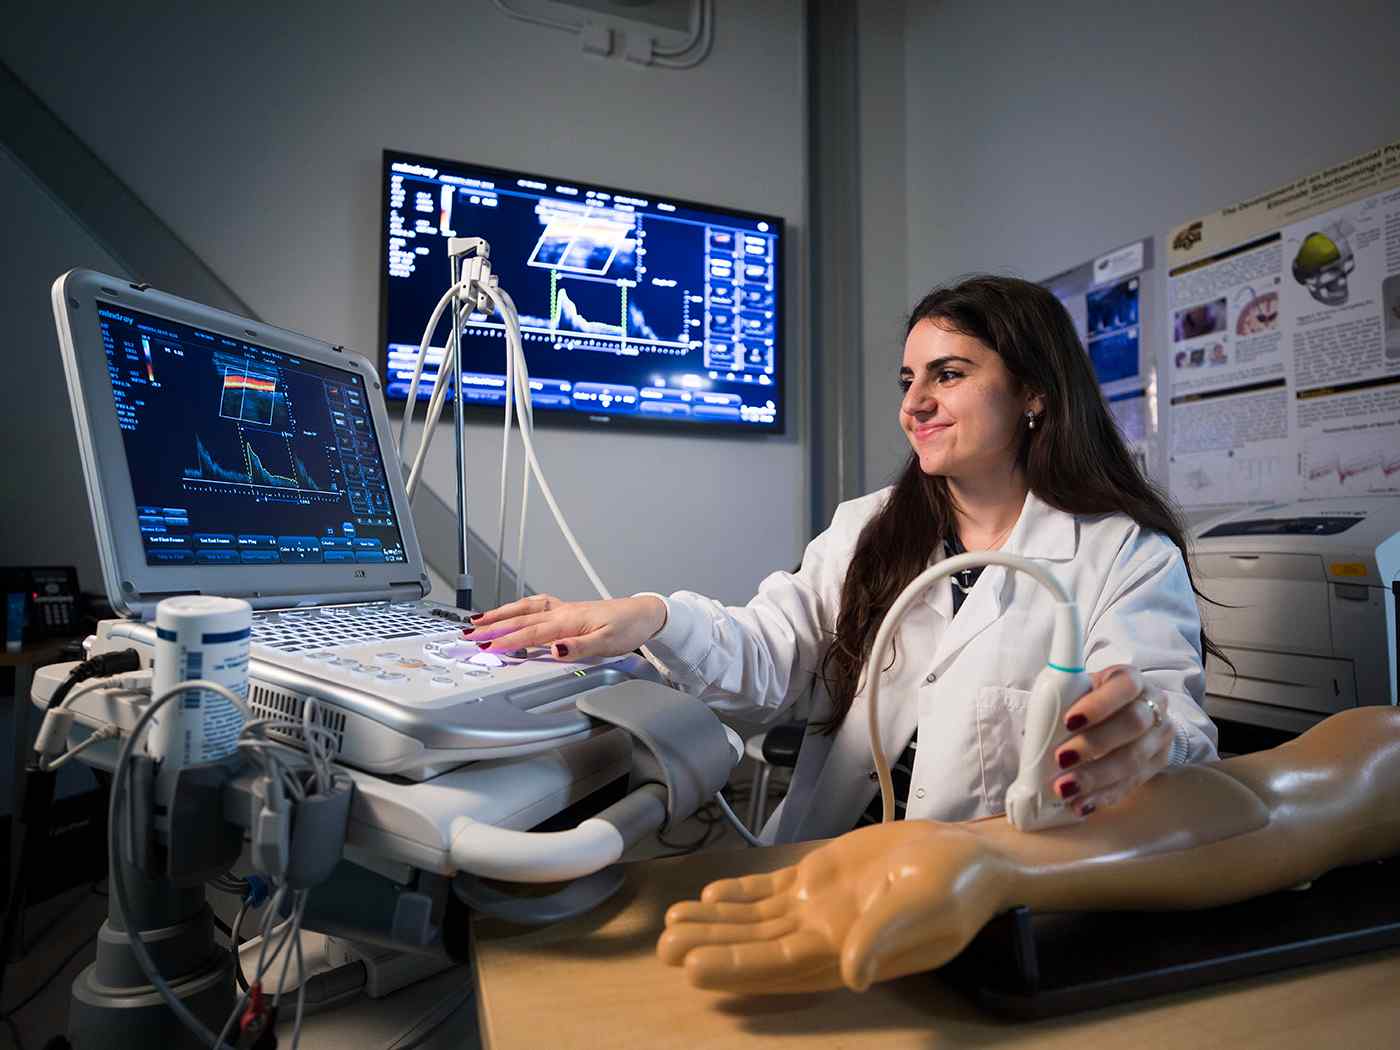 A student works with medical imaging equipment